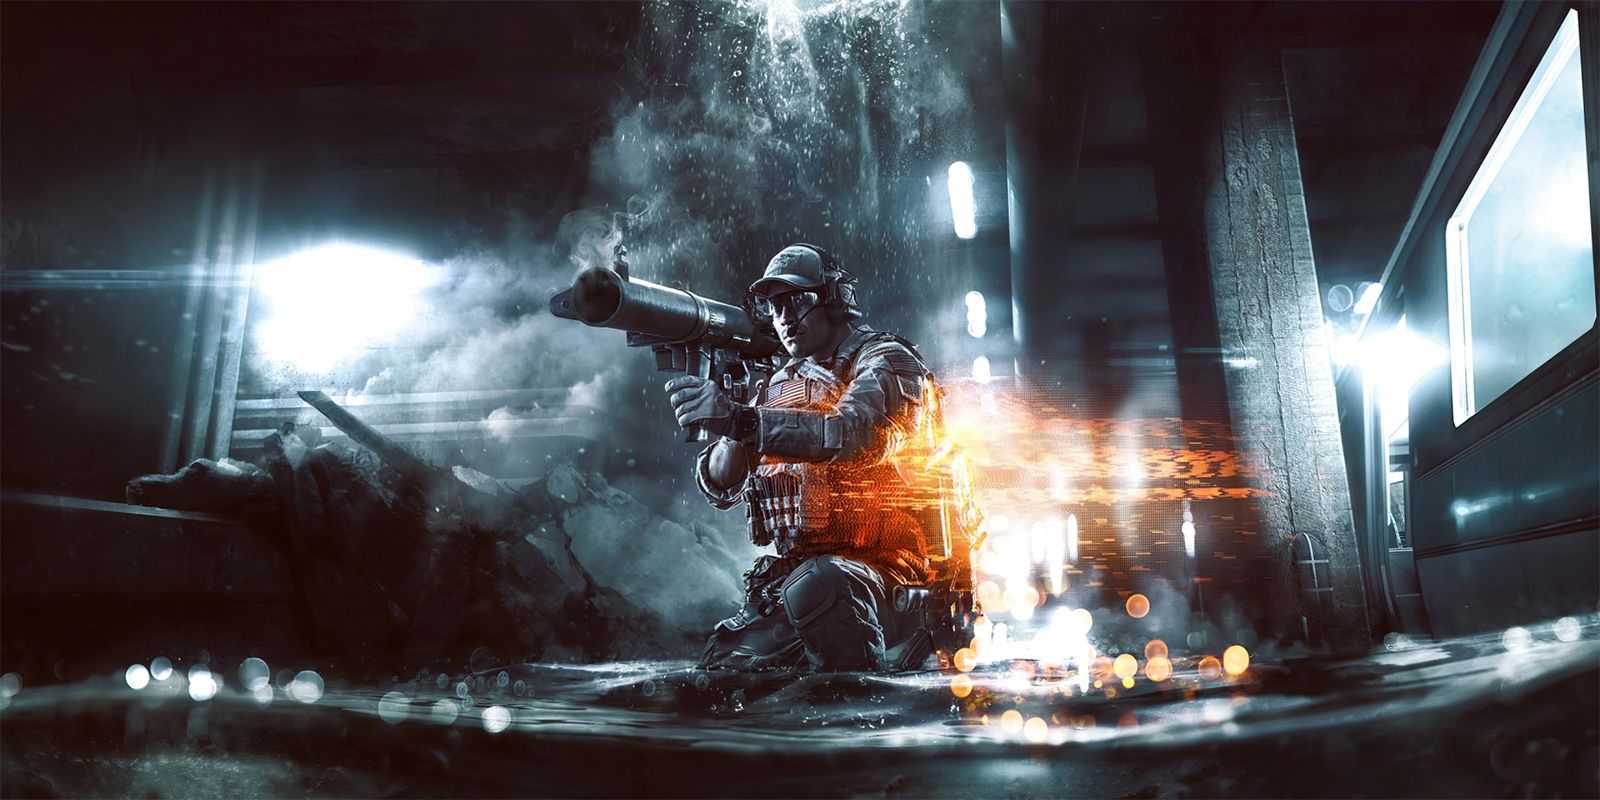 Battlefield 4 PC is currently free for  Prime members